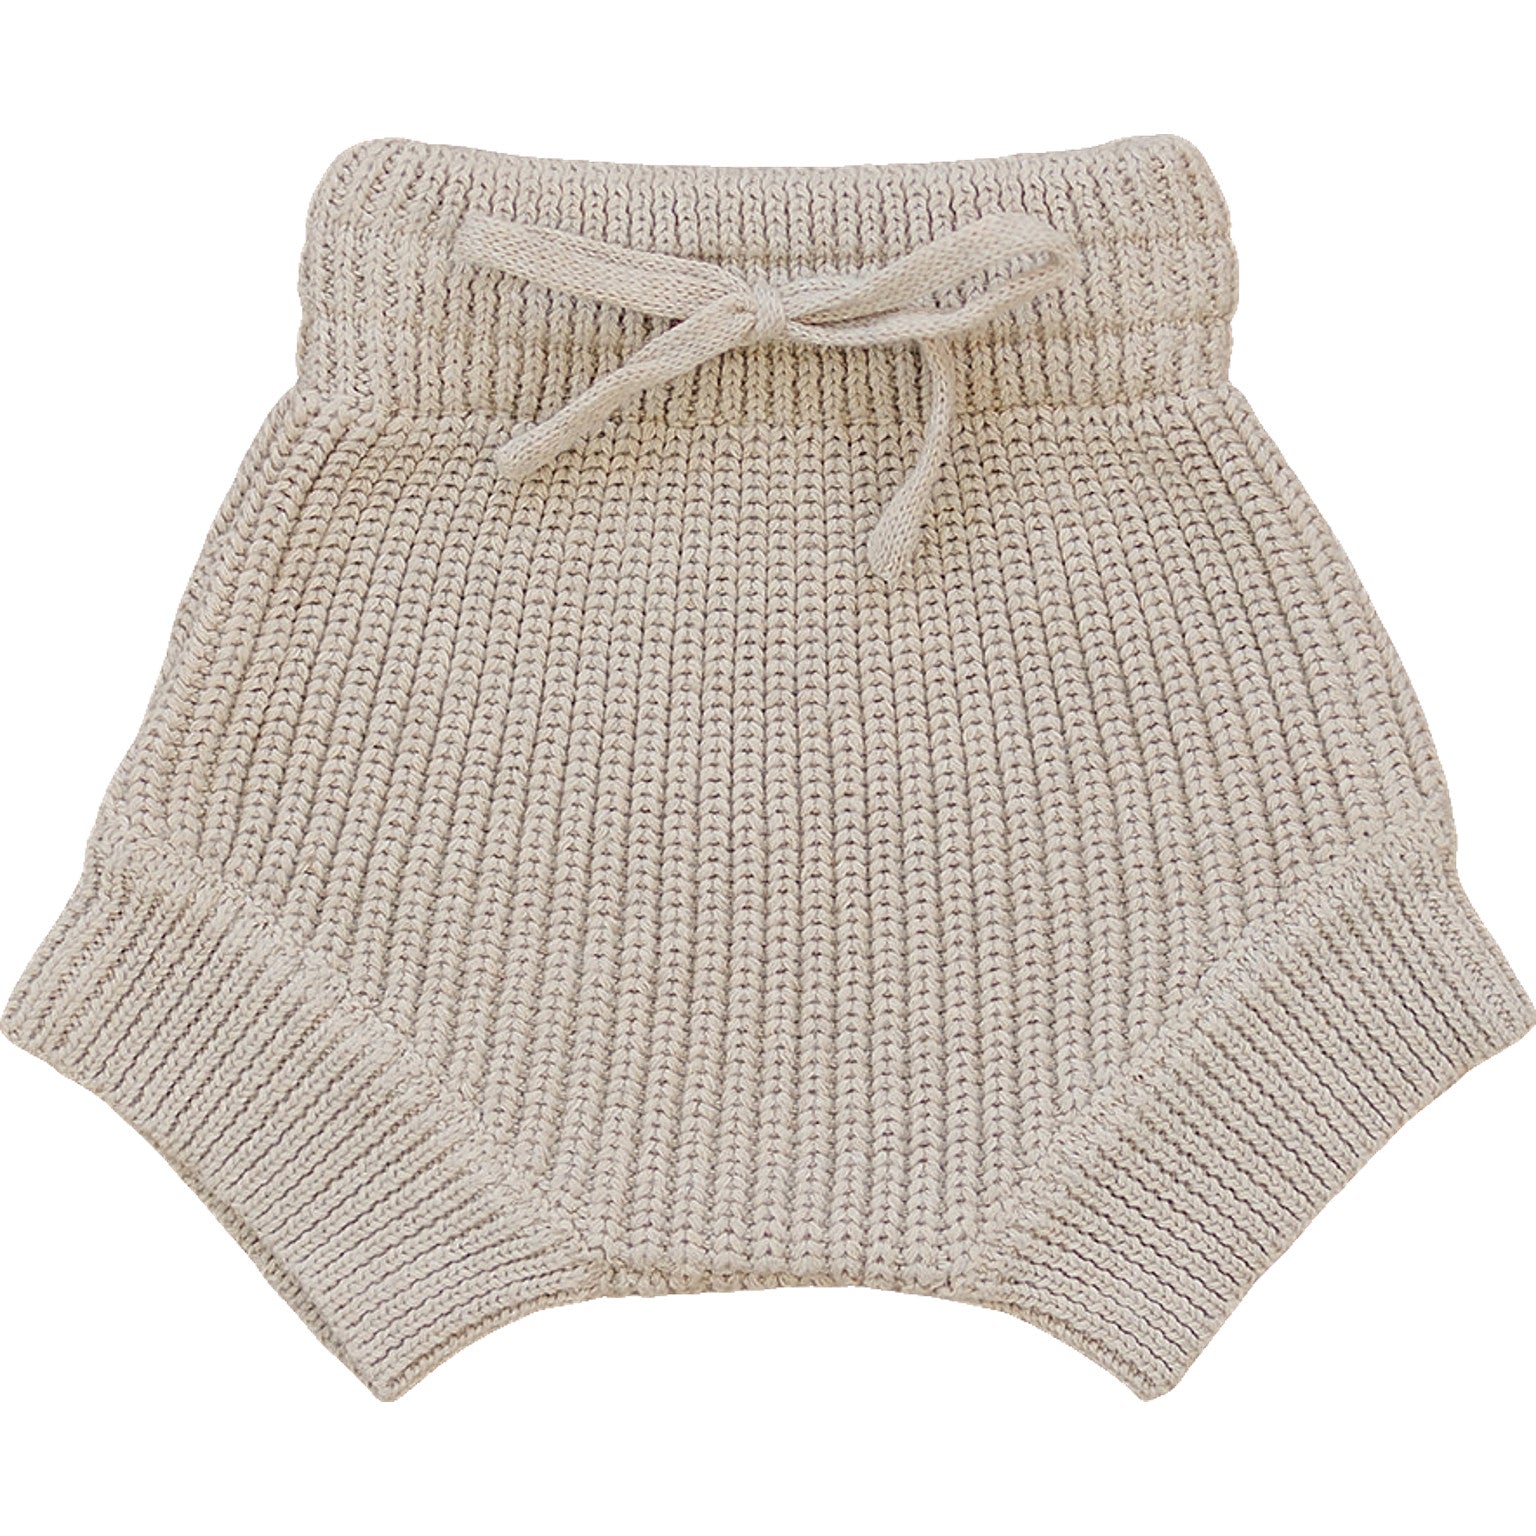 Oatmeal Knit Bloomers